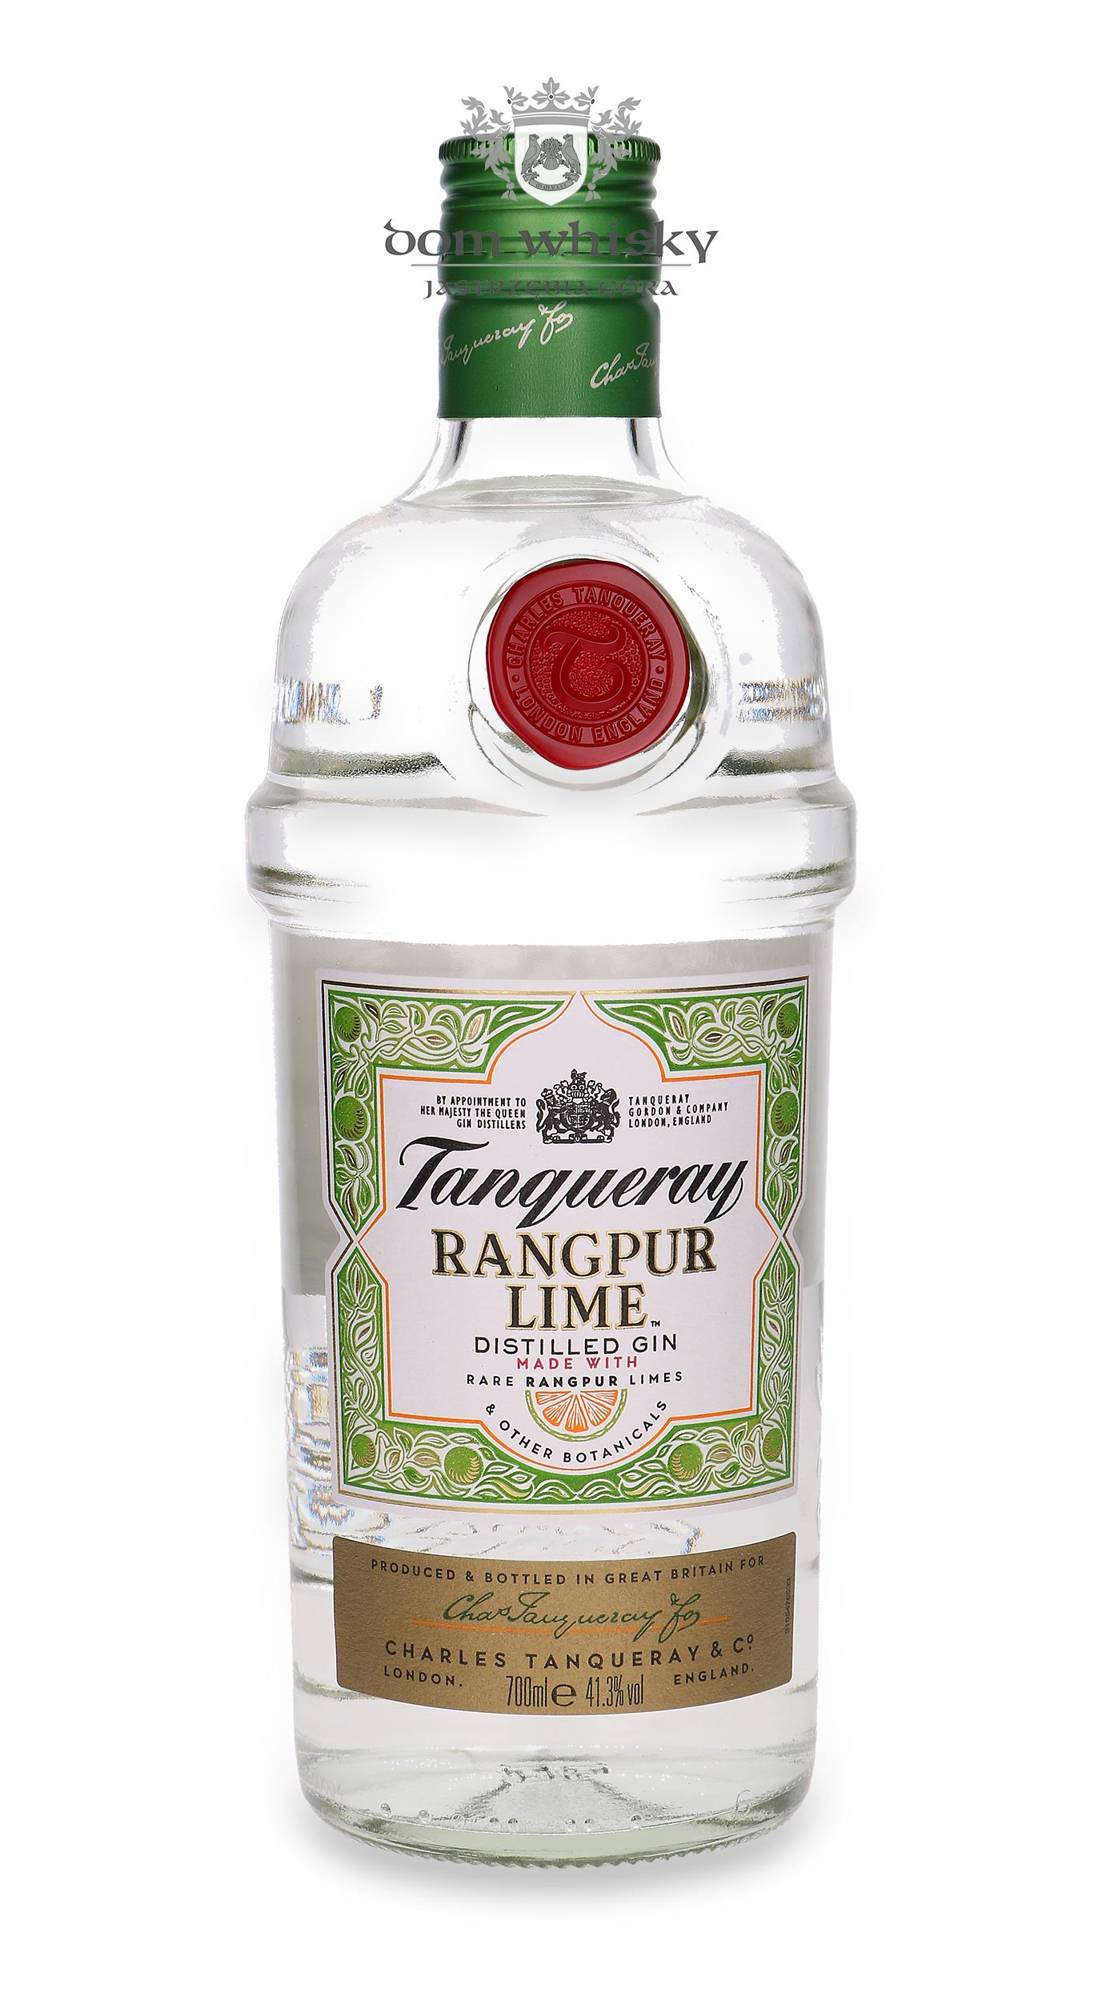 Whisky Rangpur / | Dom Tanqueray 41,3% 0,7l / Lime